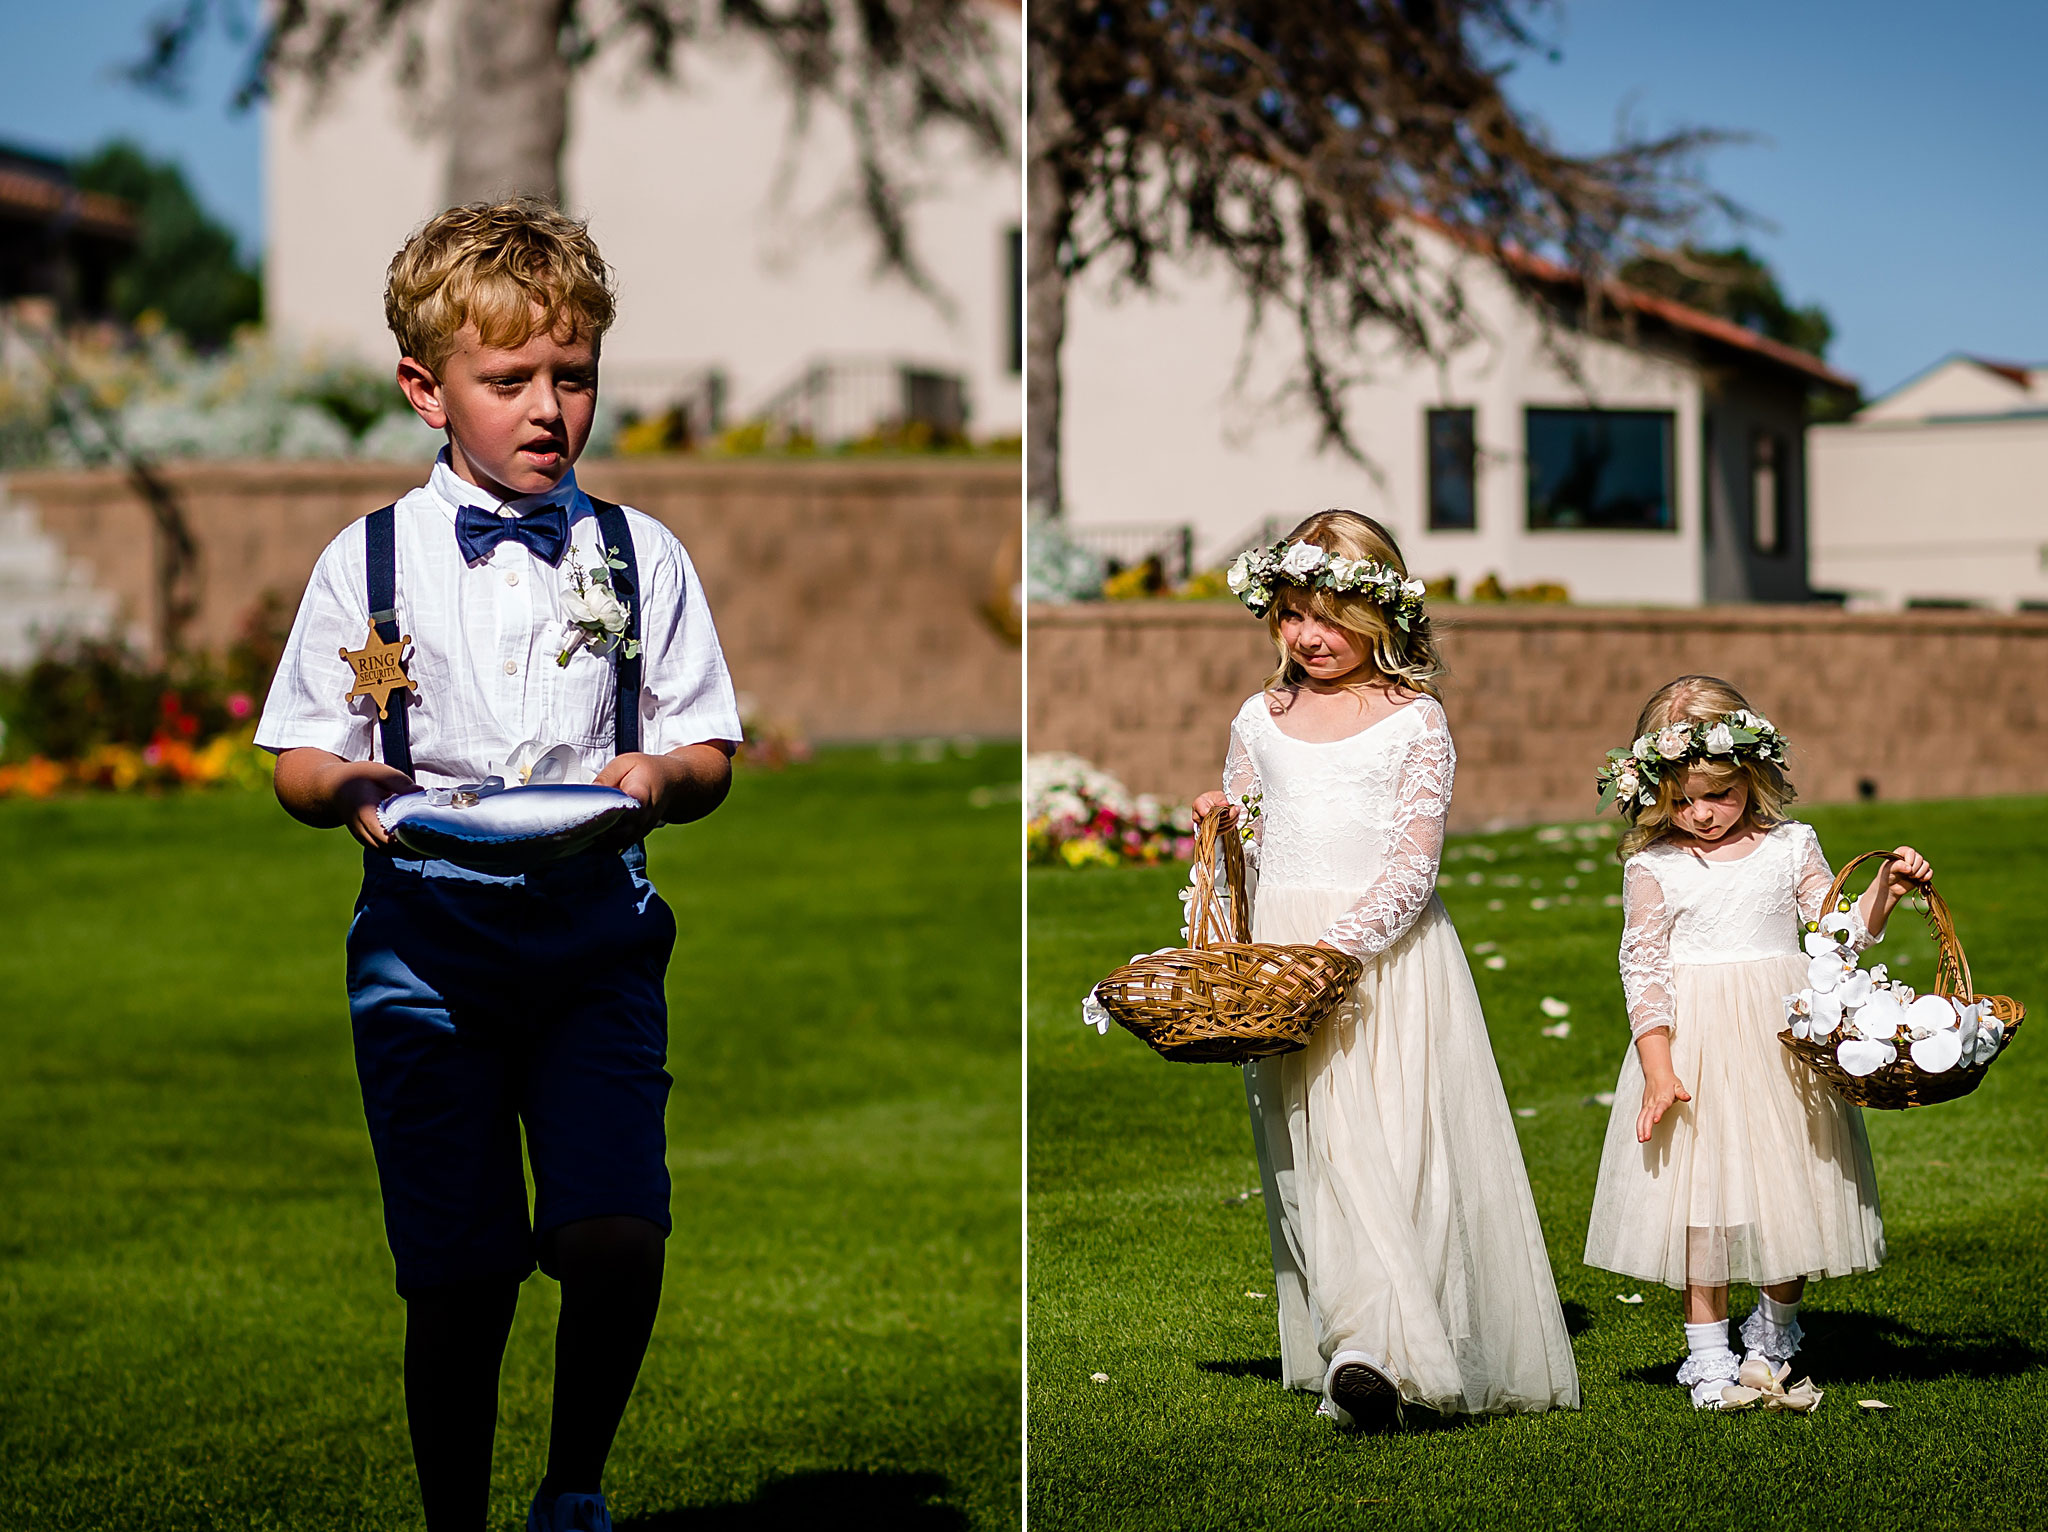 Ring Bearer and Flower Girls walking down the aisle. Kelli & Jason's golf course wedding at The Ranch Country Club by Colorado Wedding Photographer Jennifer Garza, Small wedding ideas, Intimate wedding, Golf Course Wedding, Country Club Wedding, Summer Wedding, Golf Wedding, Wedding planning, Colorado Wedding Photographer, Colorado Elopement Photographer, Colorado Elopement, Colorado Wedding, Denver Wedding Photographer, Denver Wedding, Wedding Inspiration, Summer Wedding Inspiration